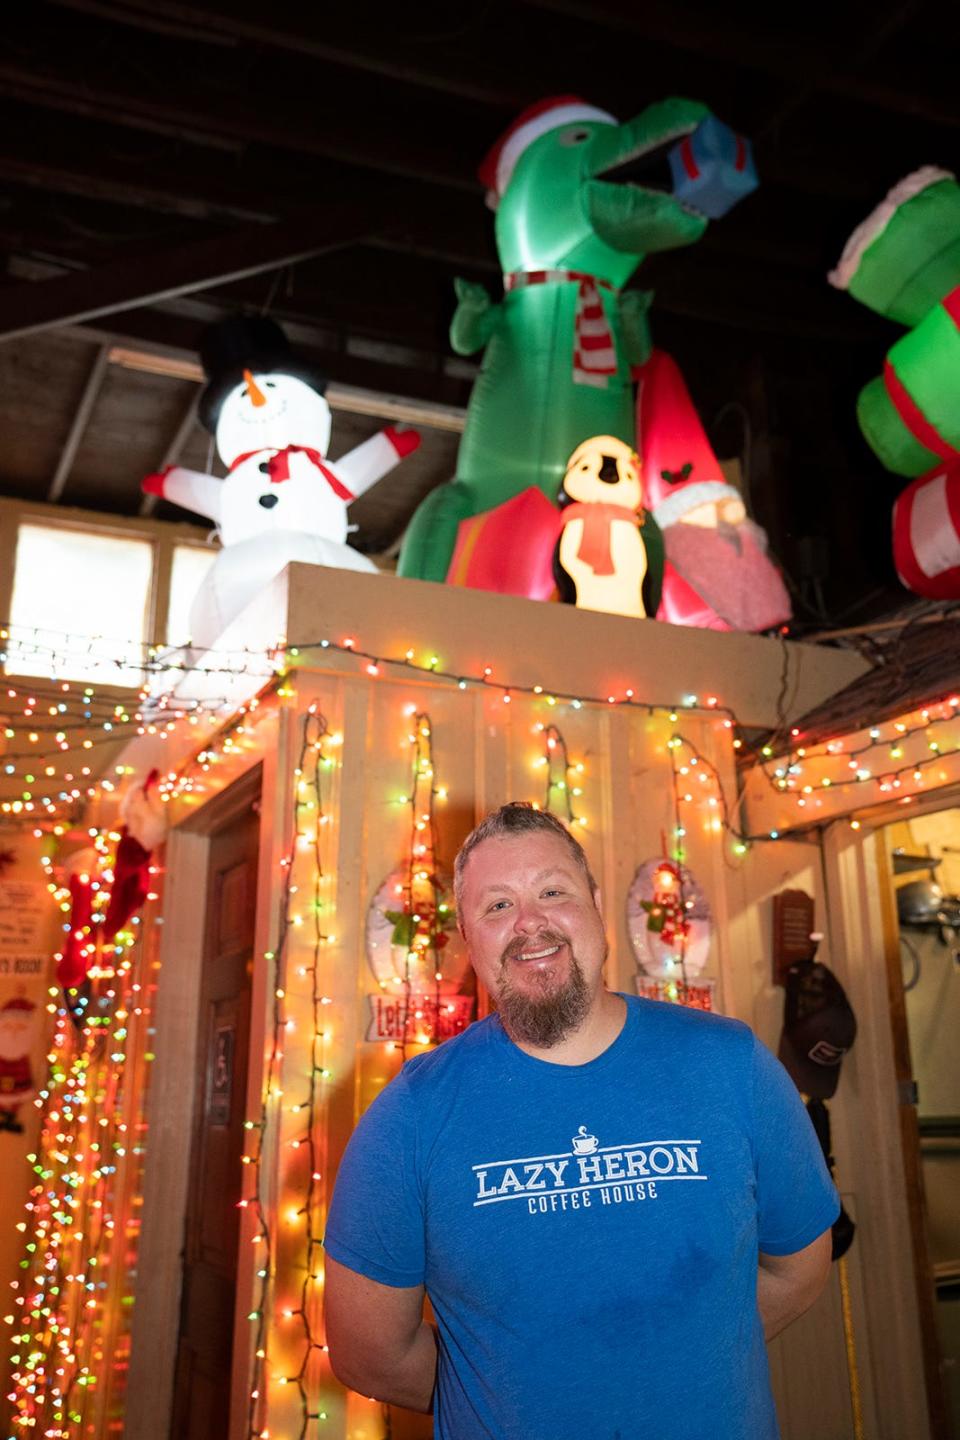 Todd Fitt, a regular-turned-employee at Donn's Depot, is in charge of the inflatable holiday figures that stand above the bar.